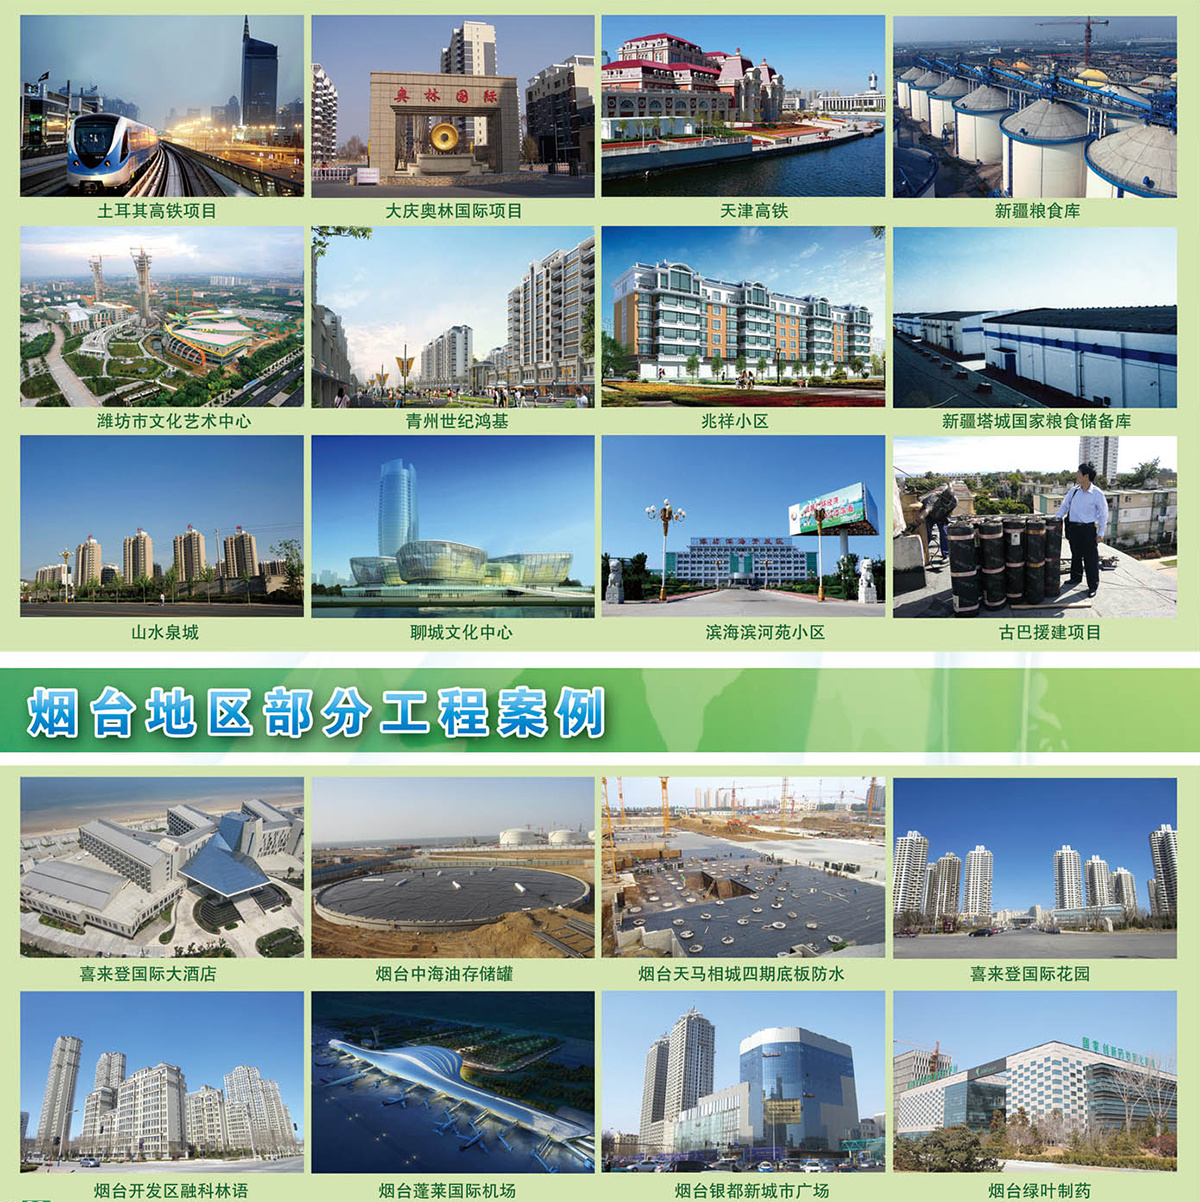 Key Projects in North China